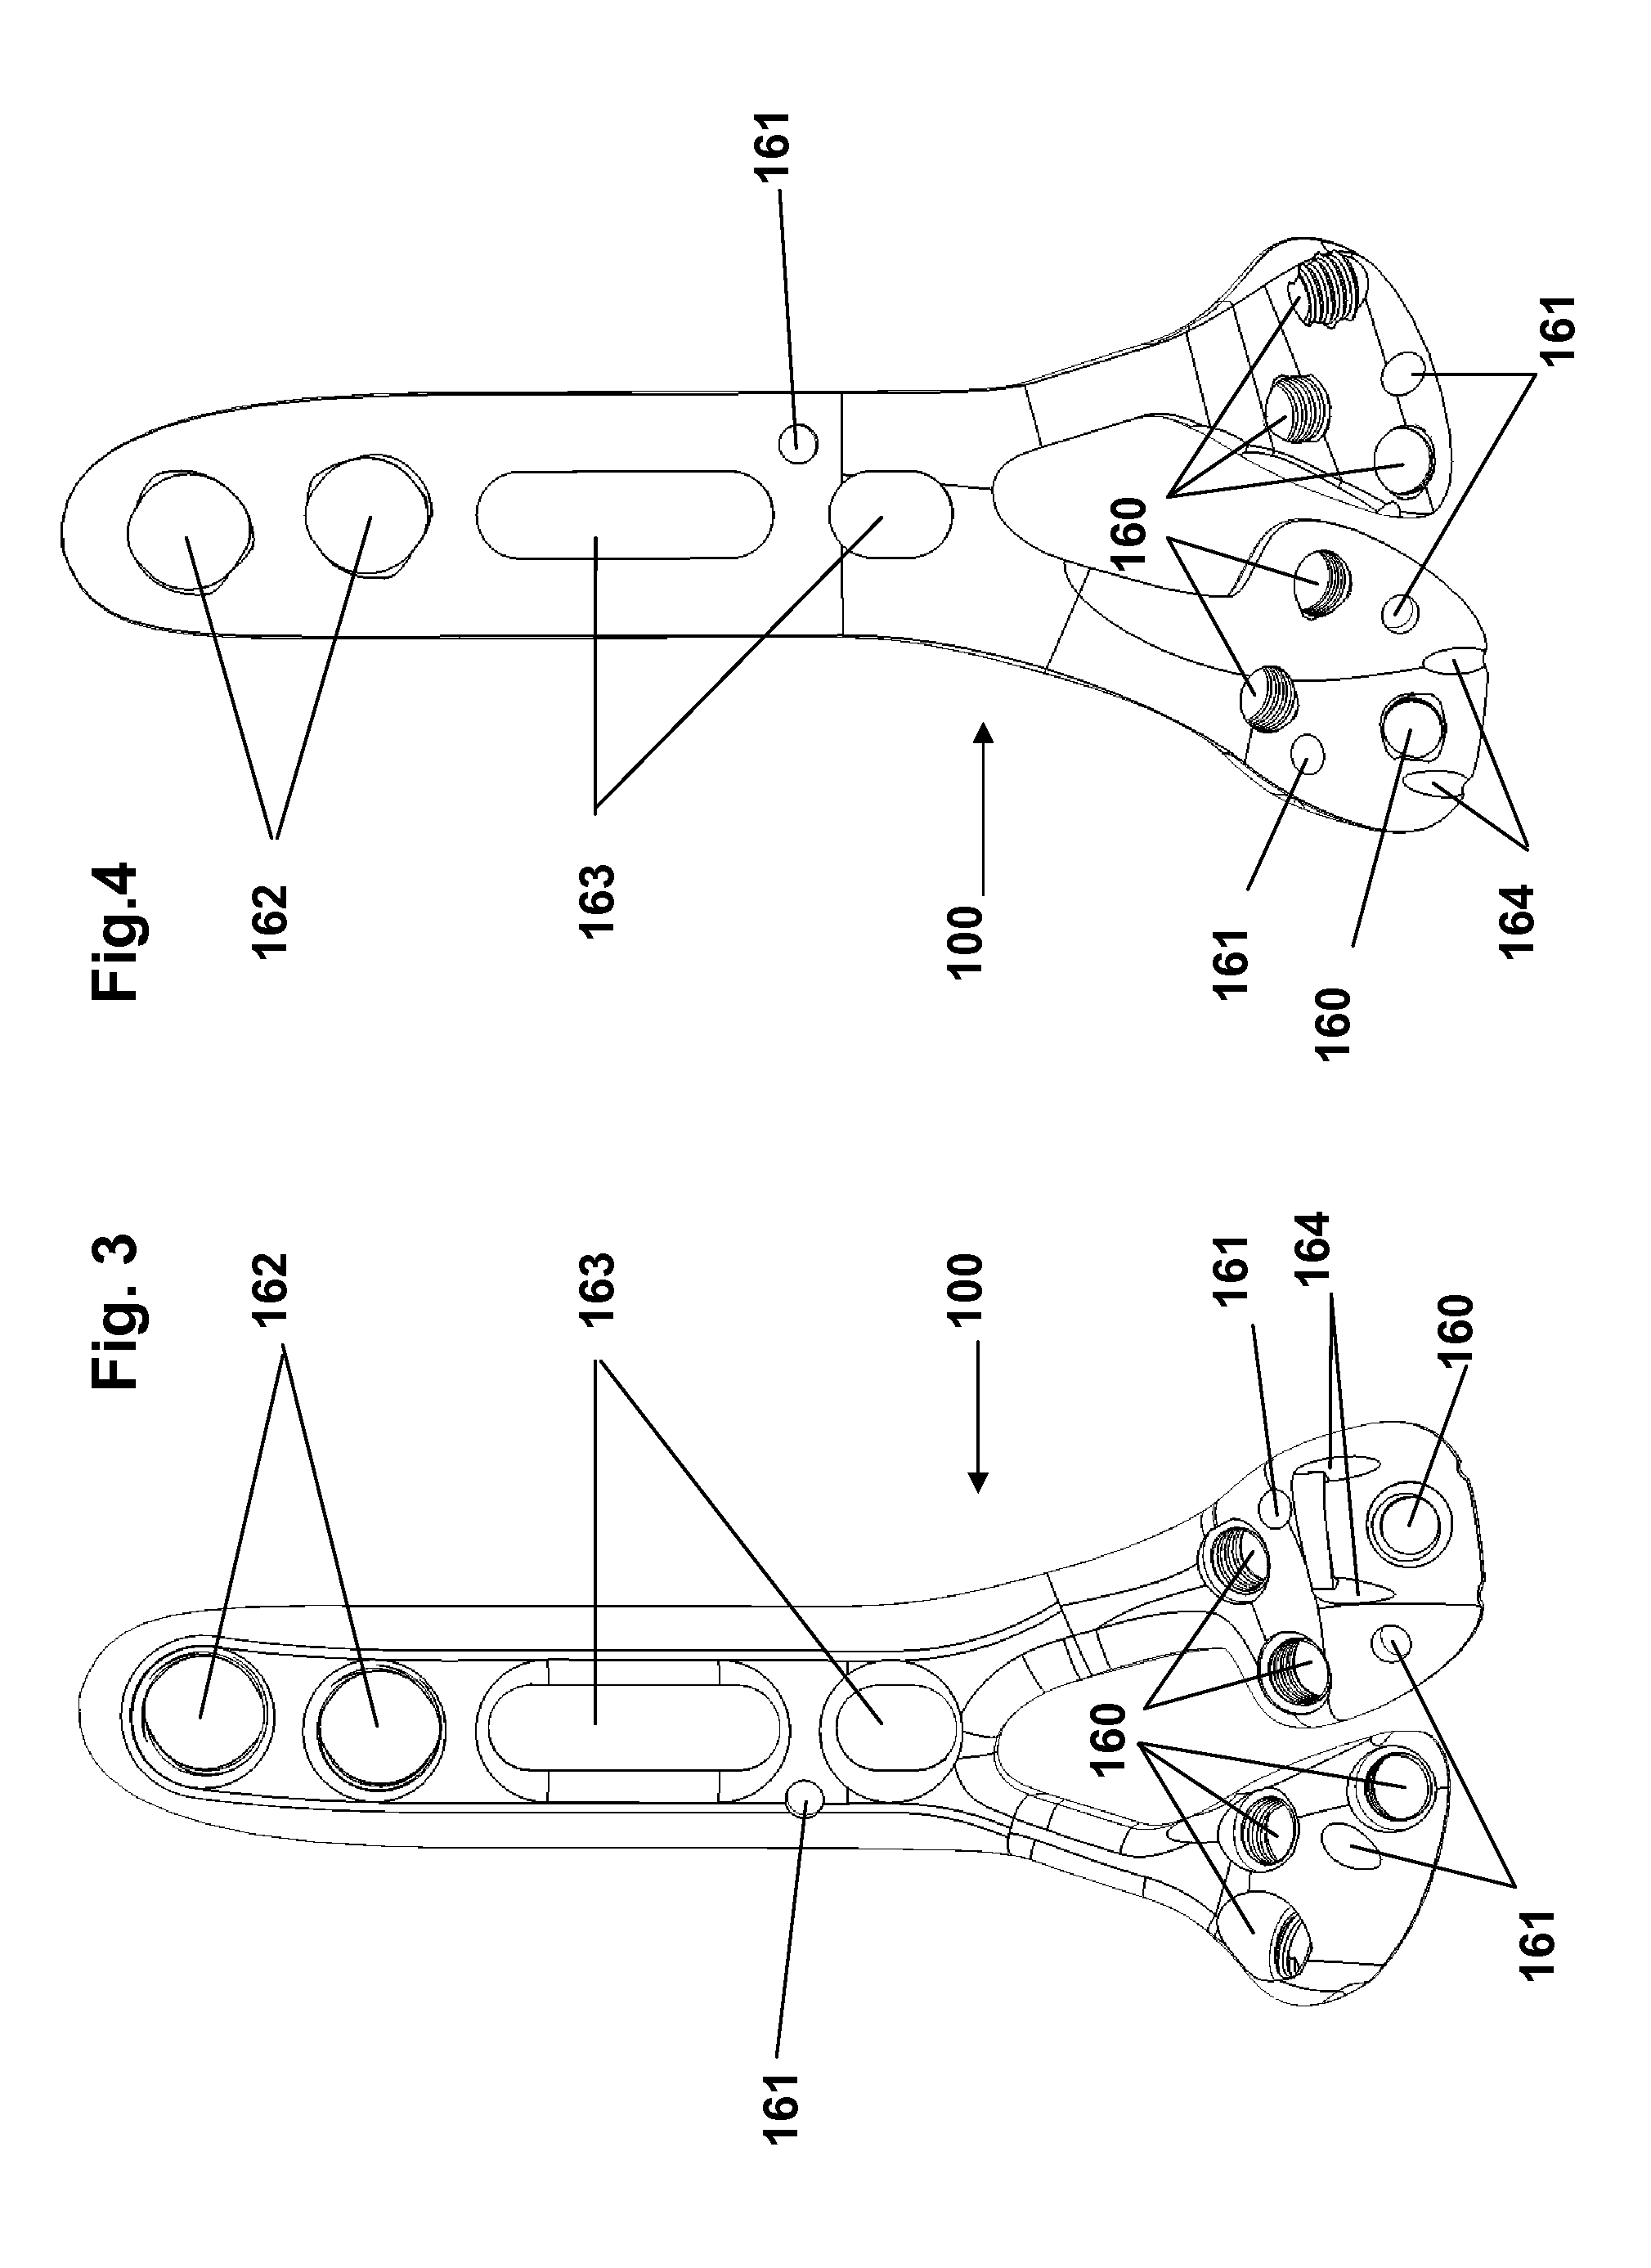 Fracture fixation plate, system and methods of use